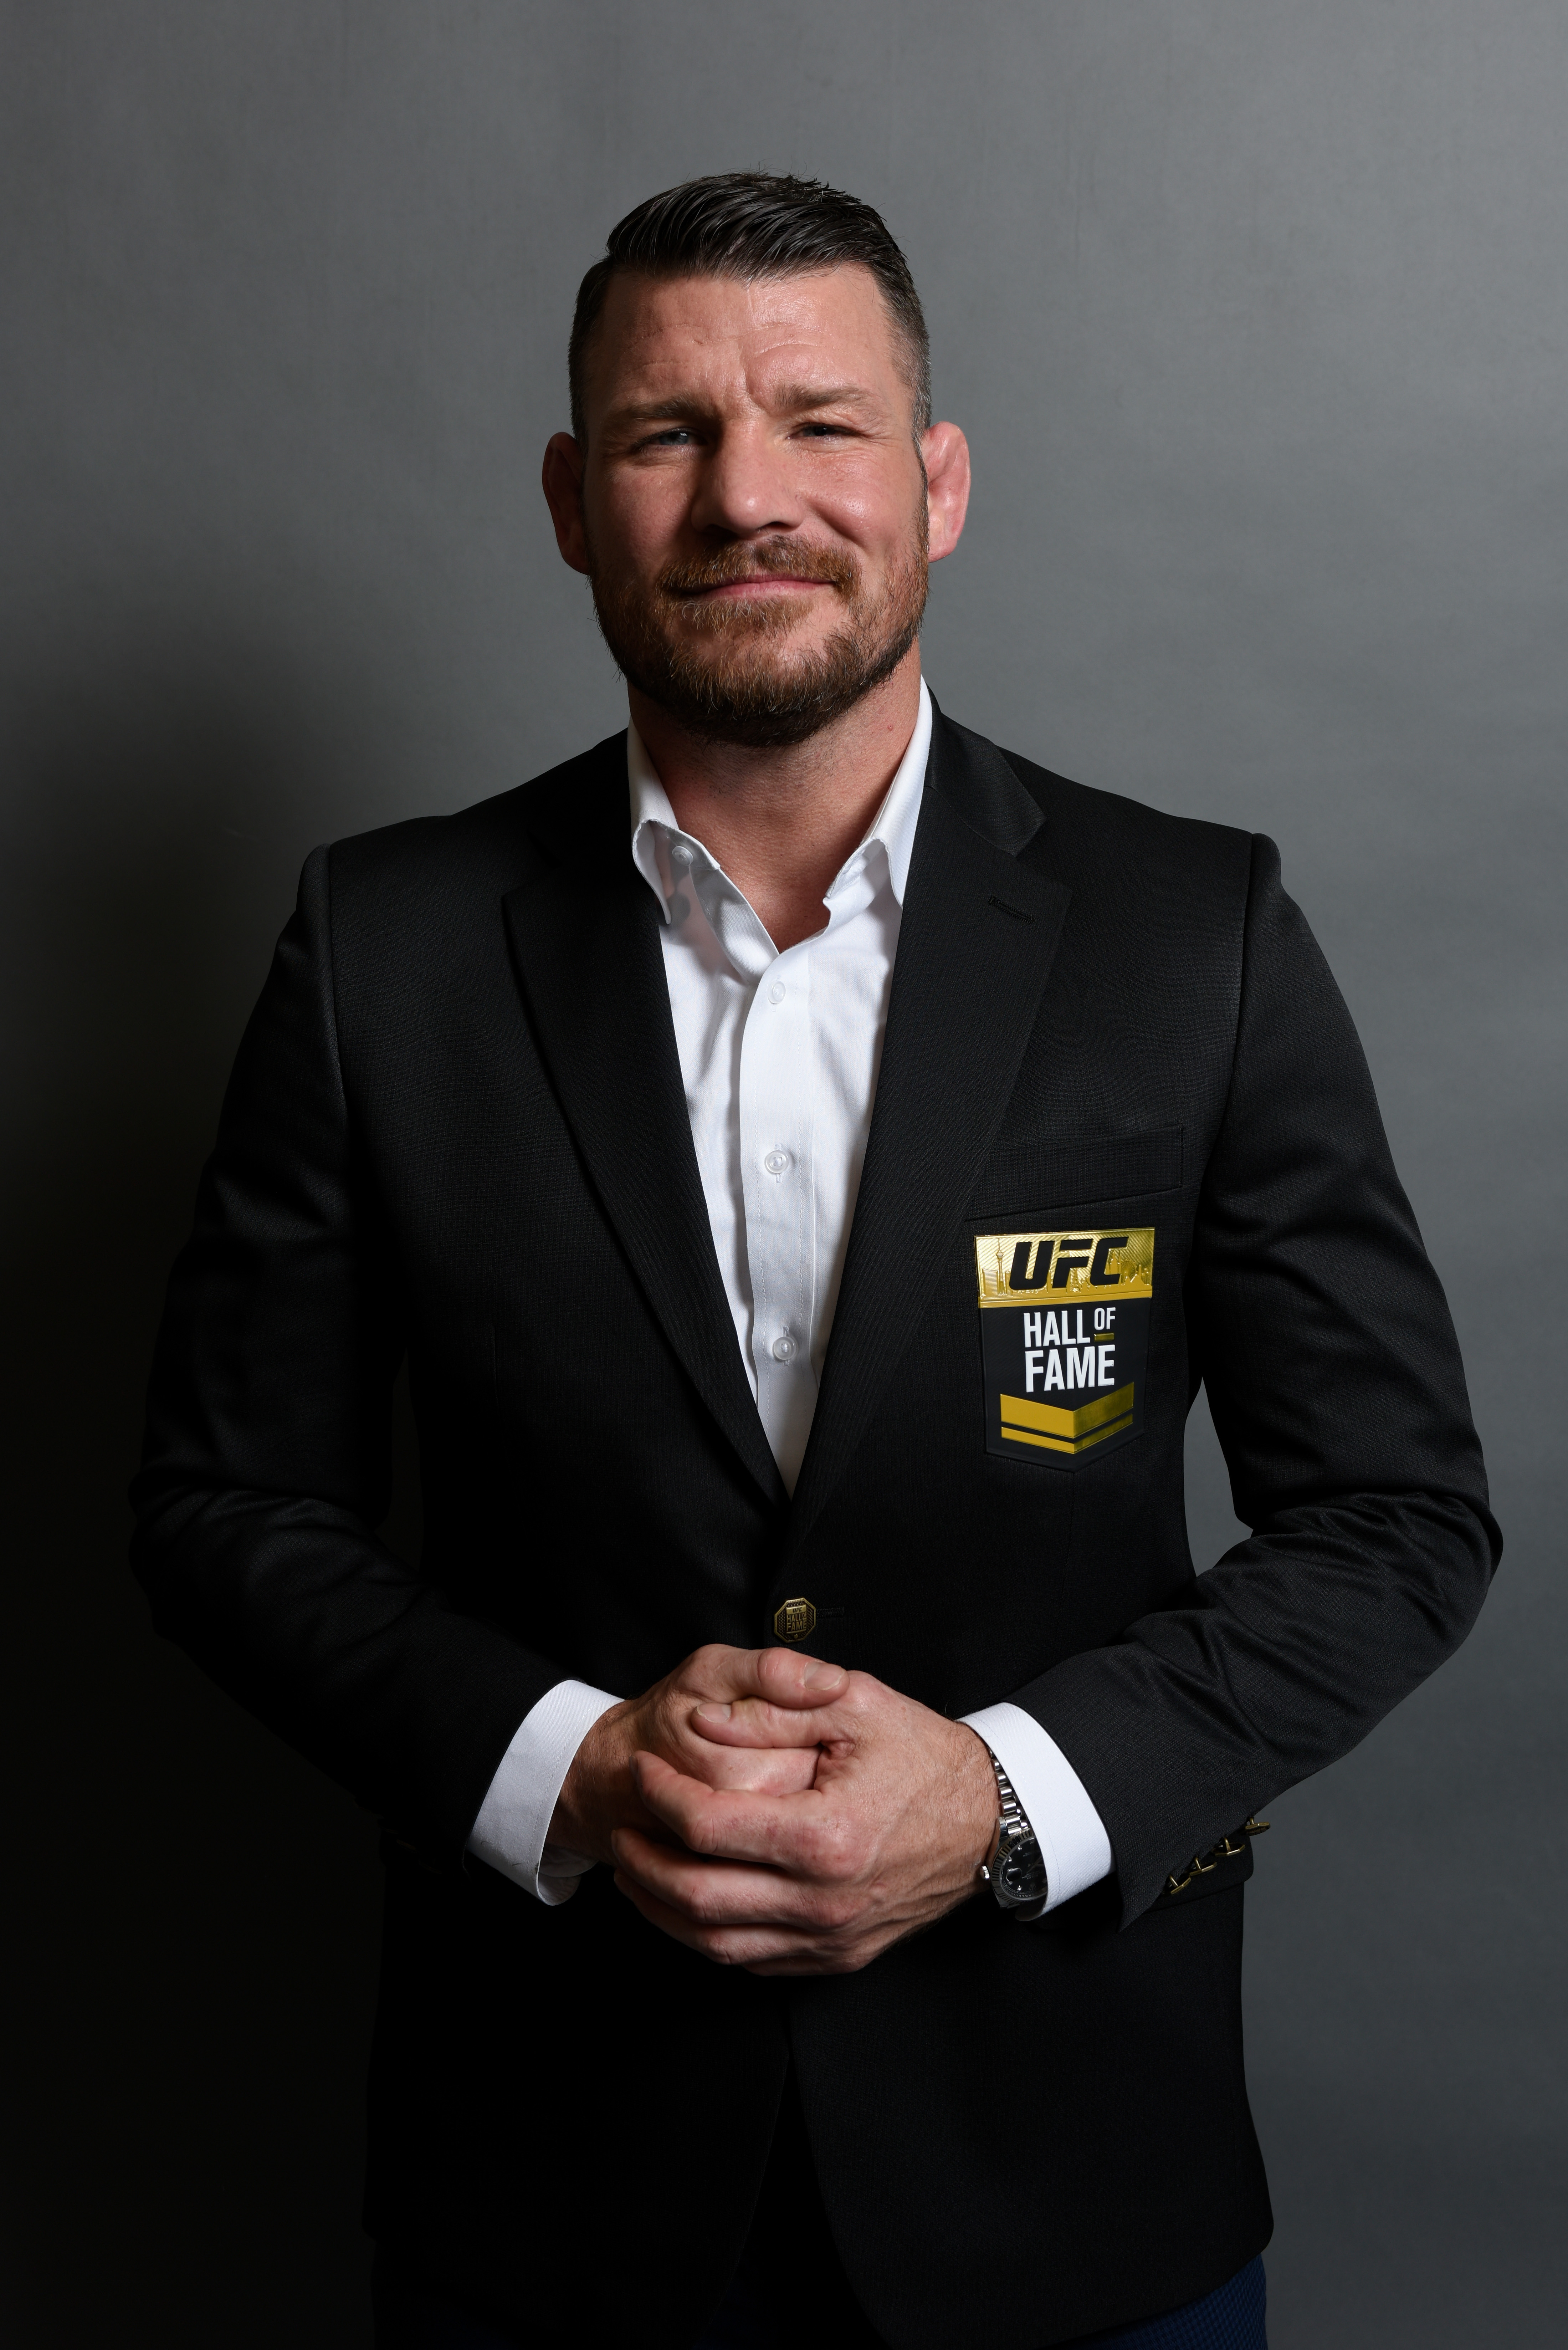 Former middleweight champion Michael Bisping gets inducted into the UFC Hall of Fame in 2019. 